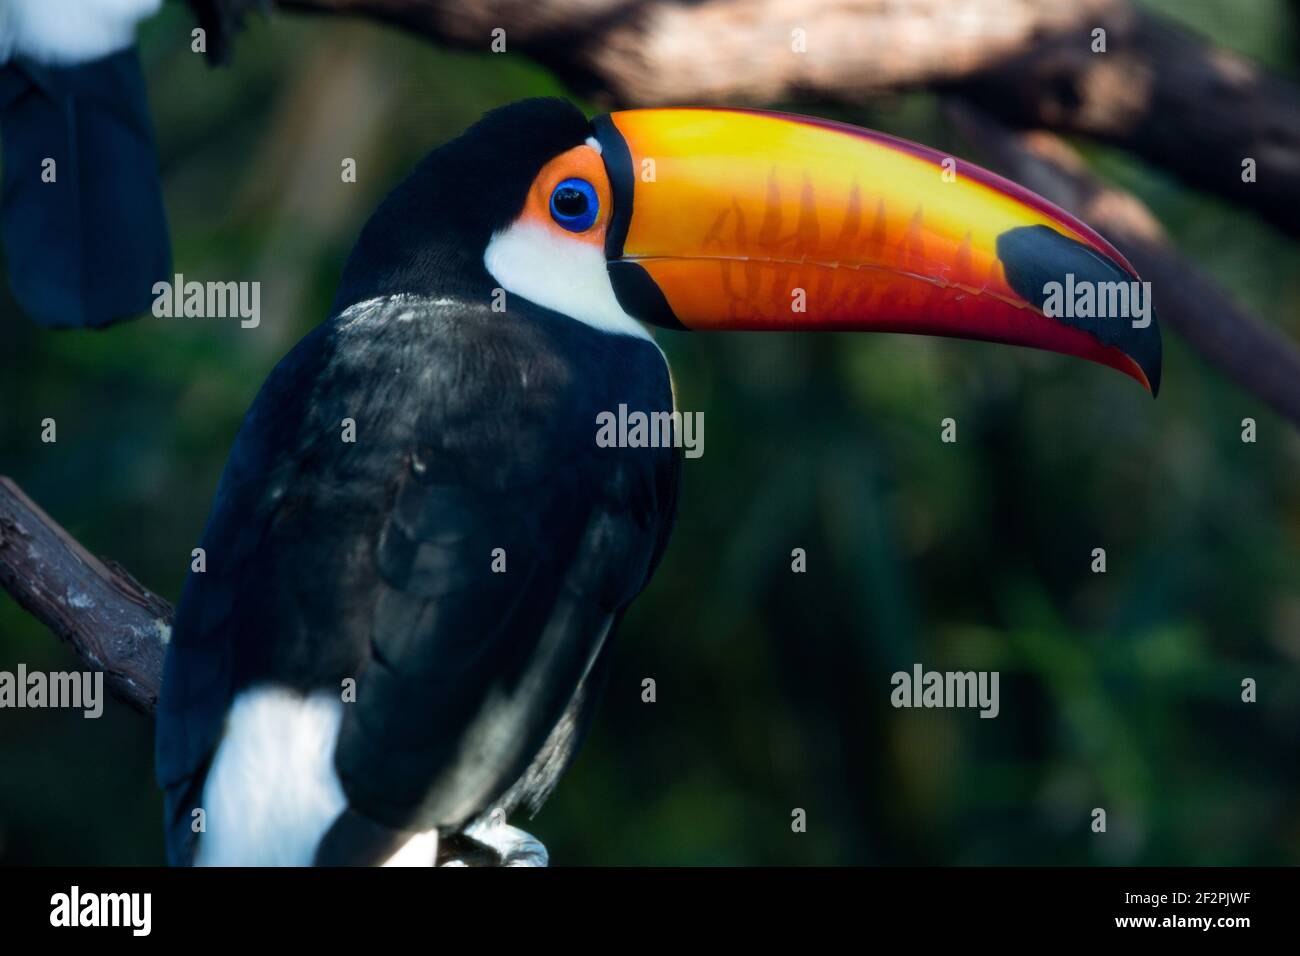 A Toco Toucan, Ramphastos toco, the largest of all toucans and native to Brazil, Bolivia, Argentina, Paraguay, and Peru. Stock Photo